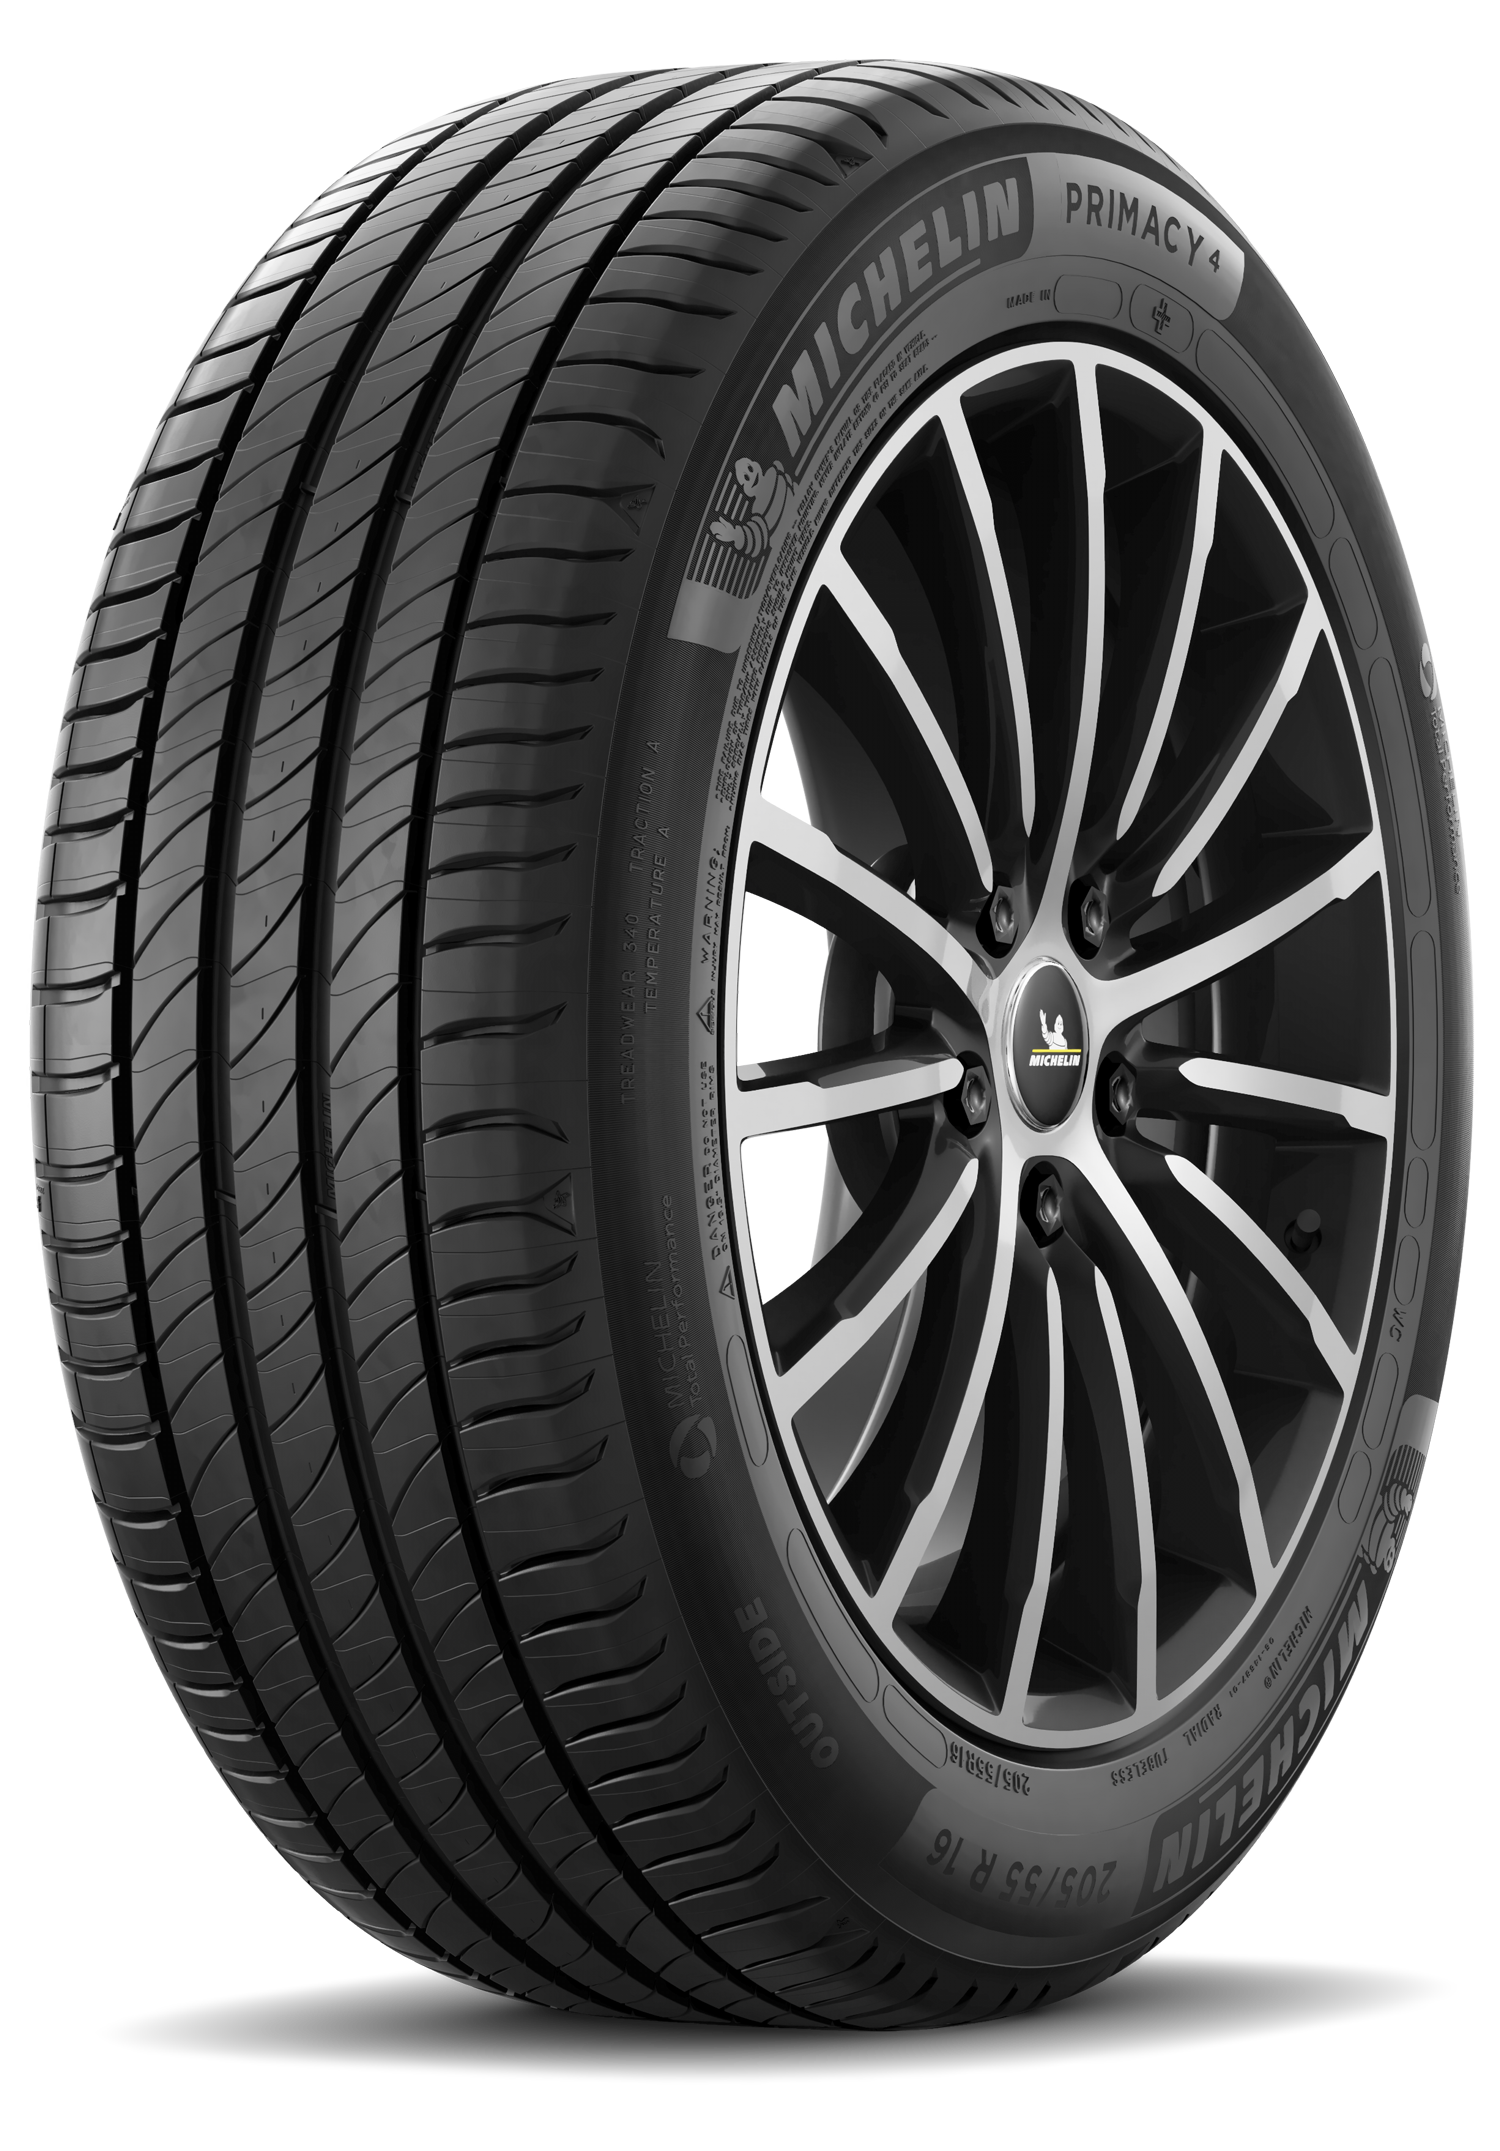 Tests Michelin Tyre Plus and 4 Reviews Primacy -